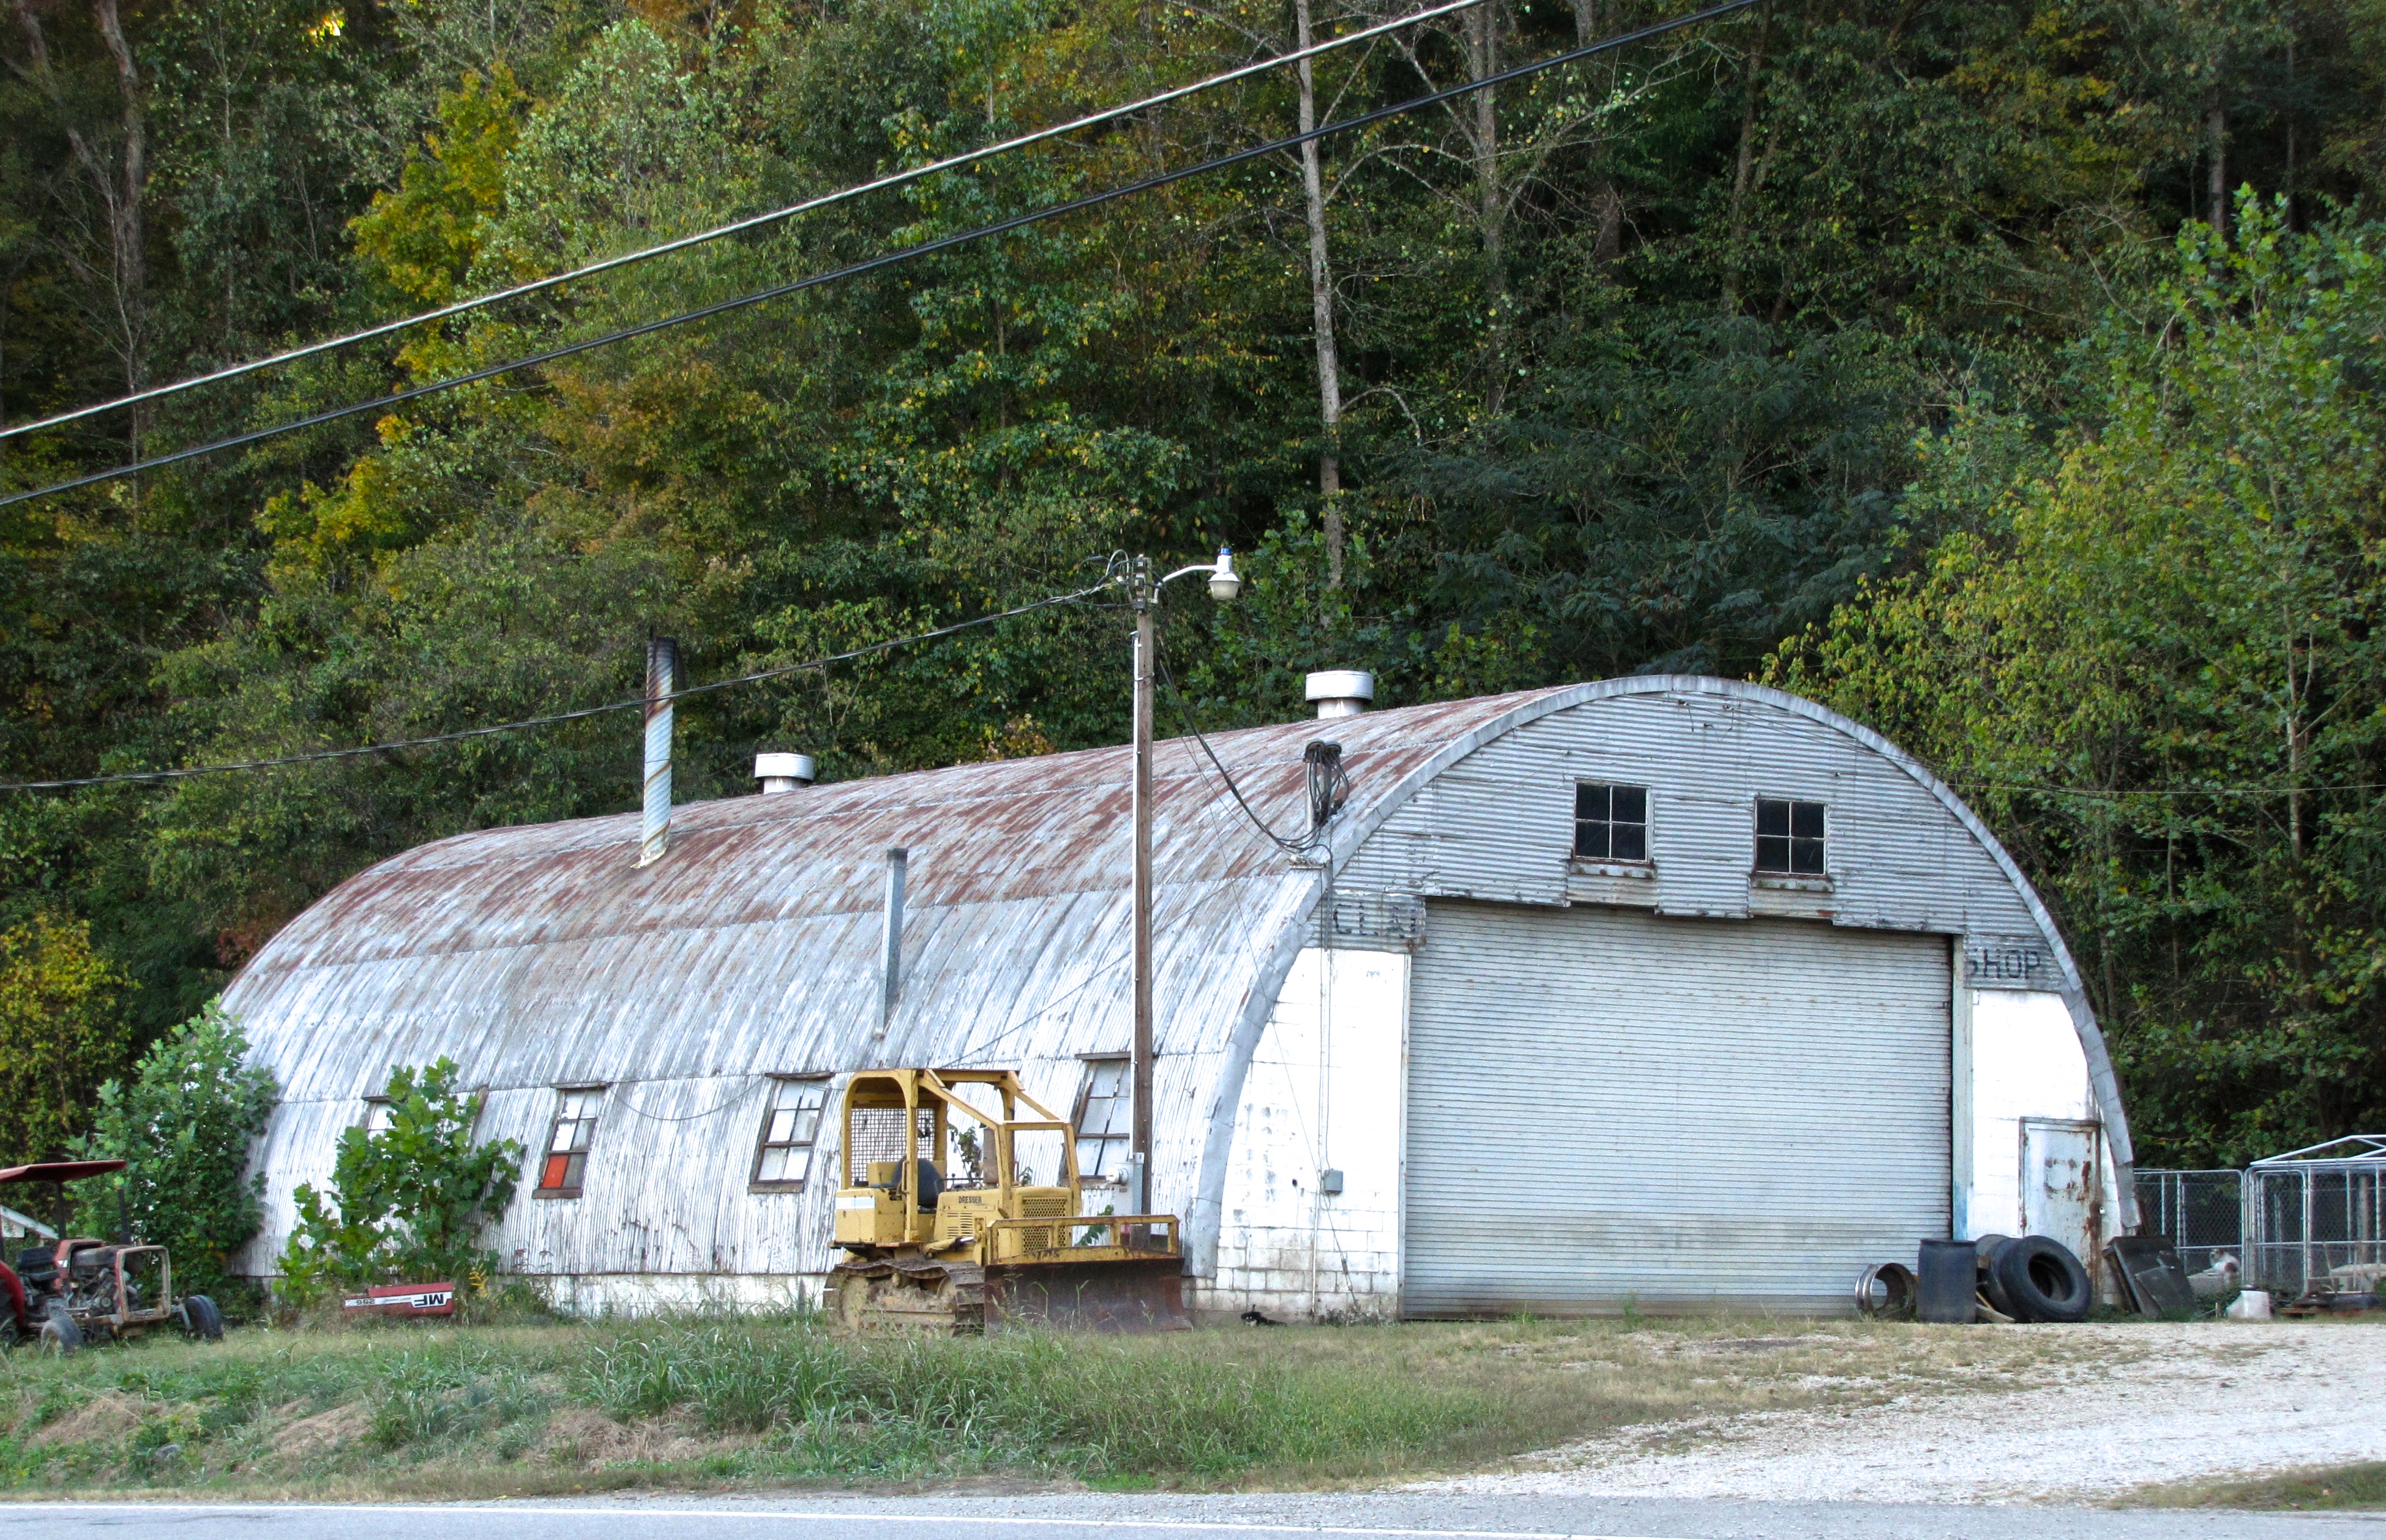 quonset hut in Oyster Bay, NY